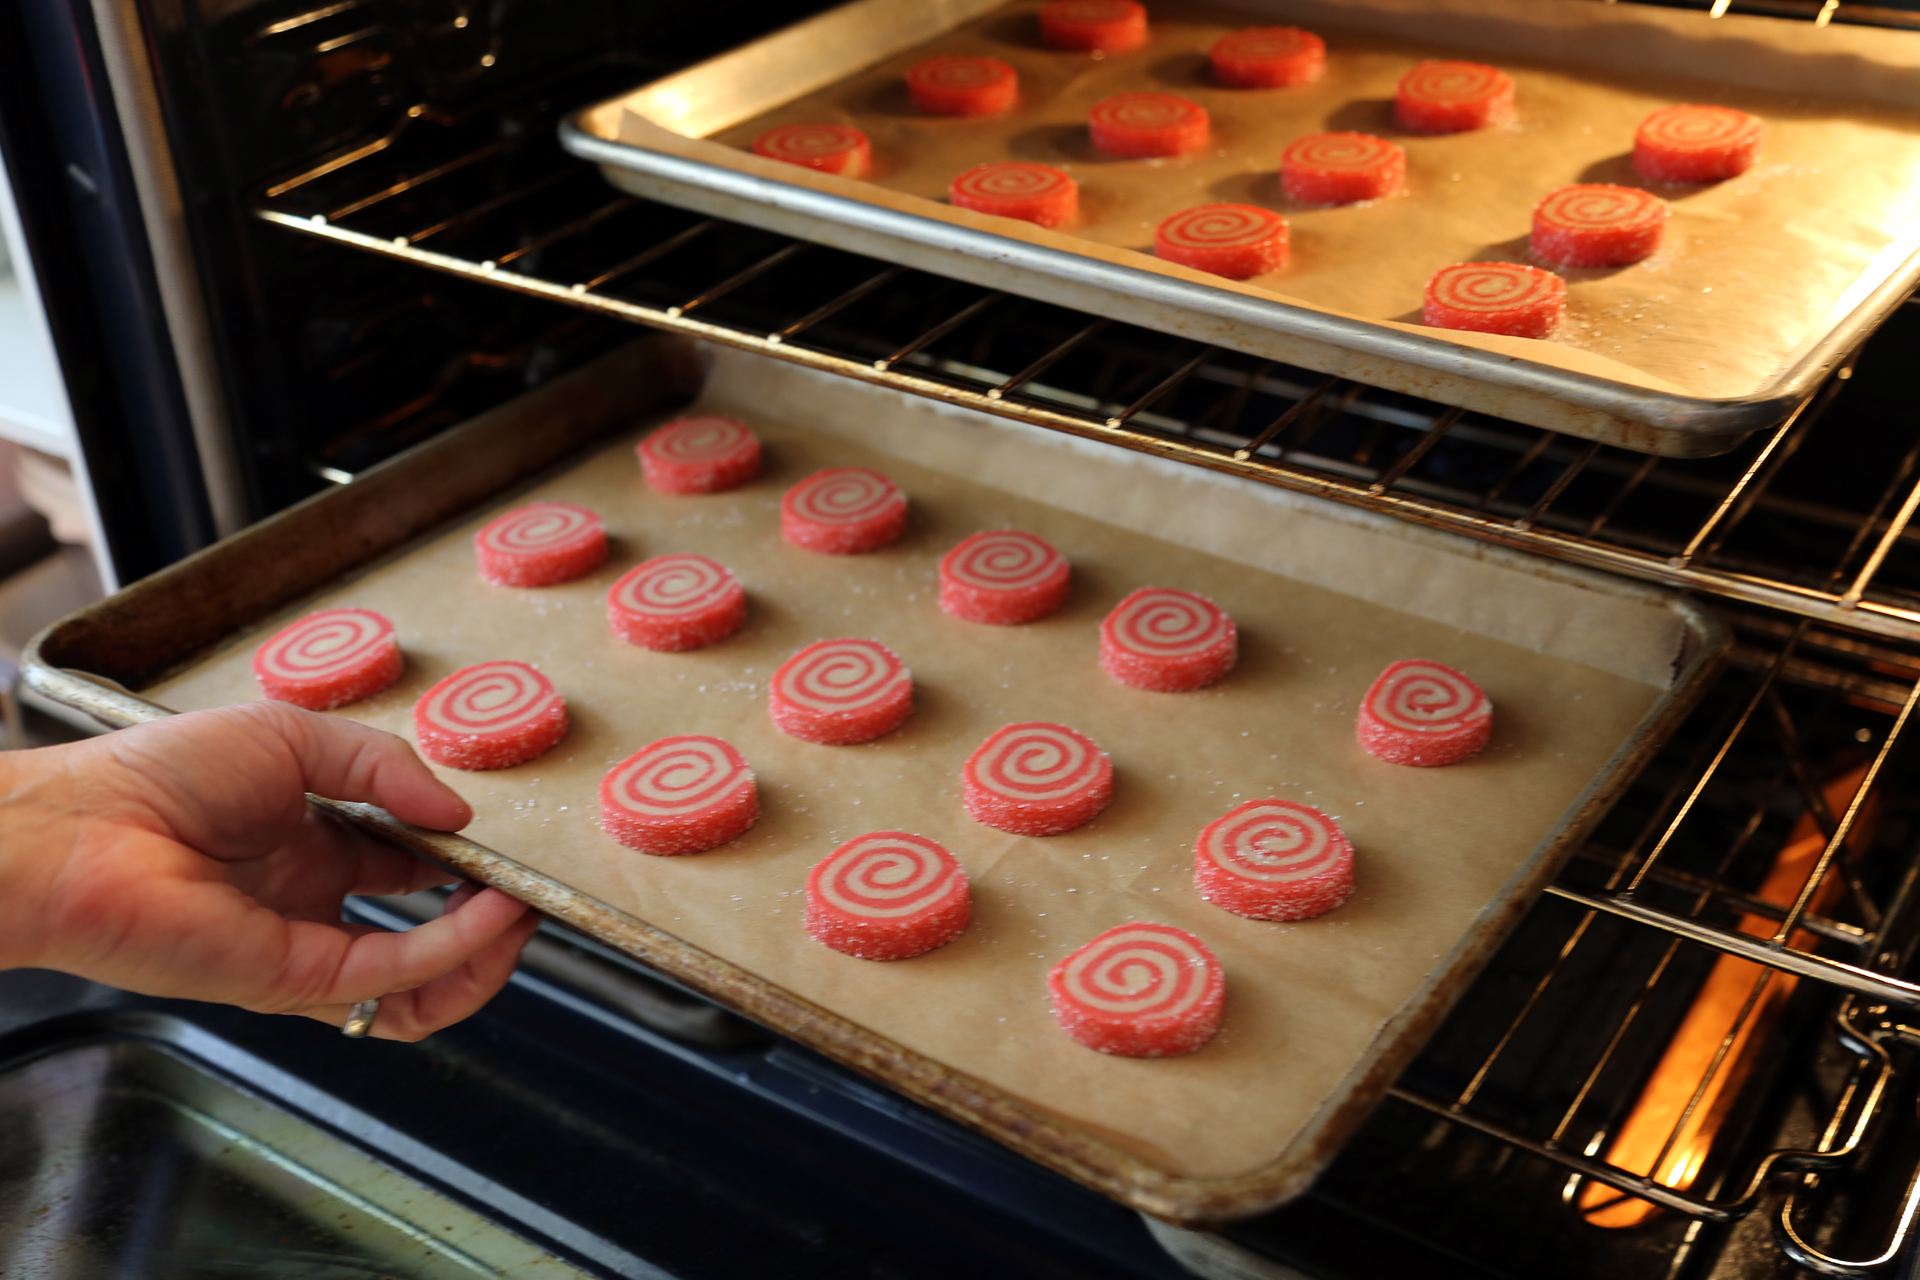 Place the slices on parchment-lined rimmed baking sheets, spacing them evenly. Bake until set but before they begin to brown, about 12 minutes.